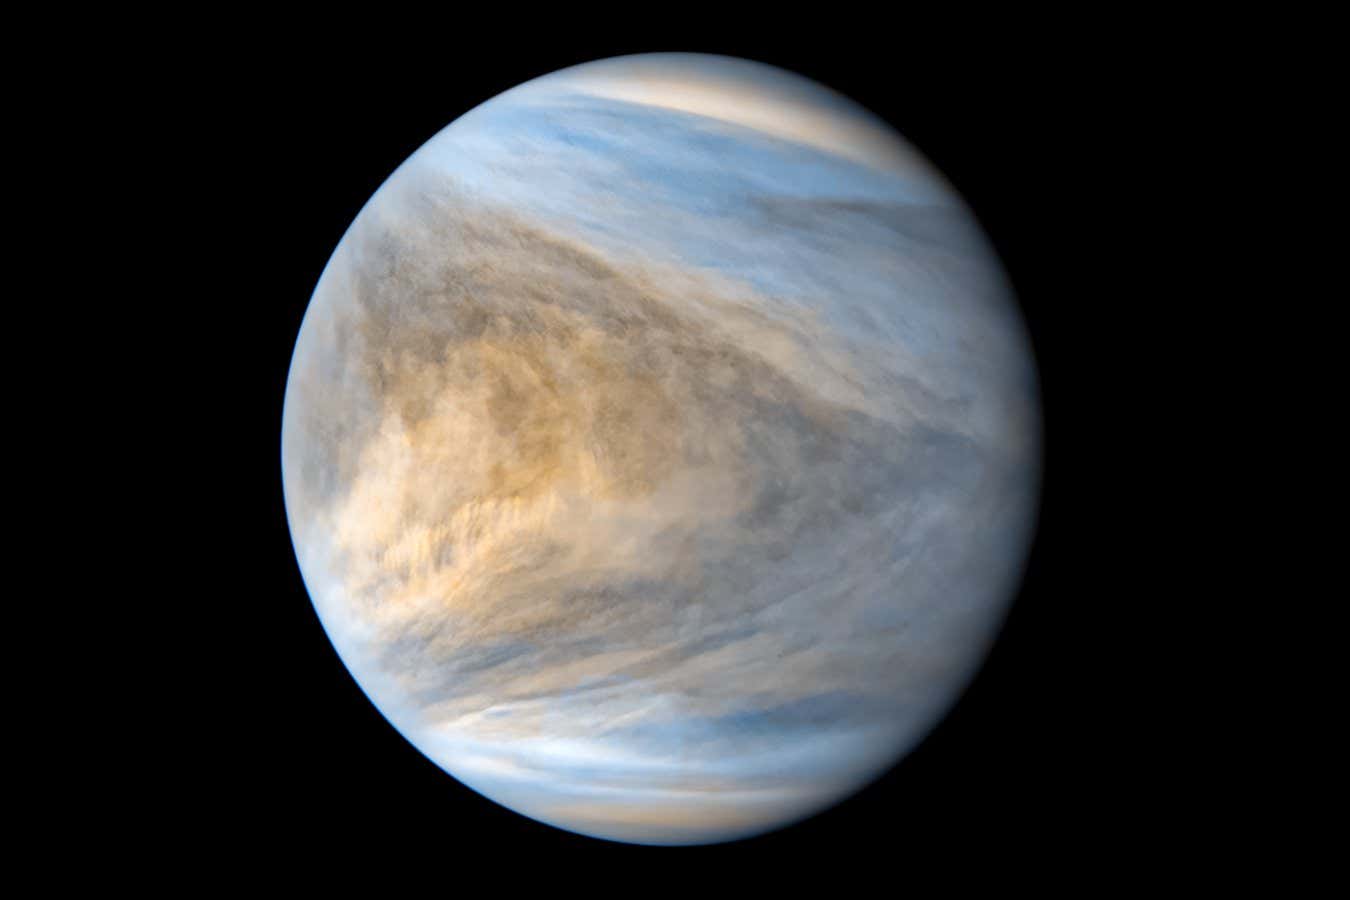 Molecules vital for life could survive in Venus’s acid clouds